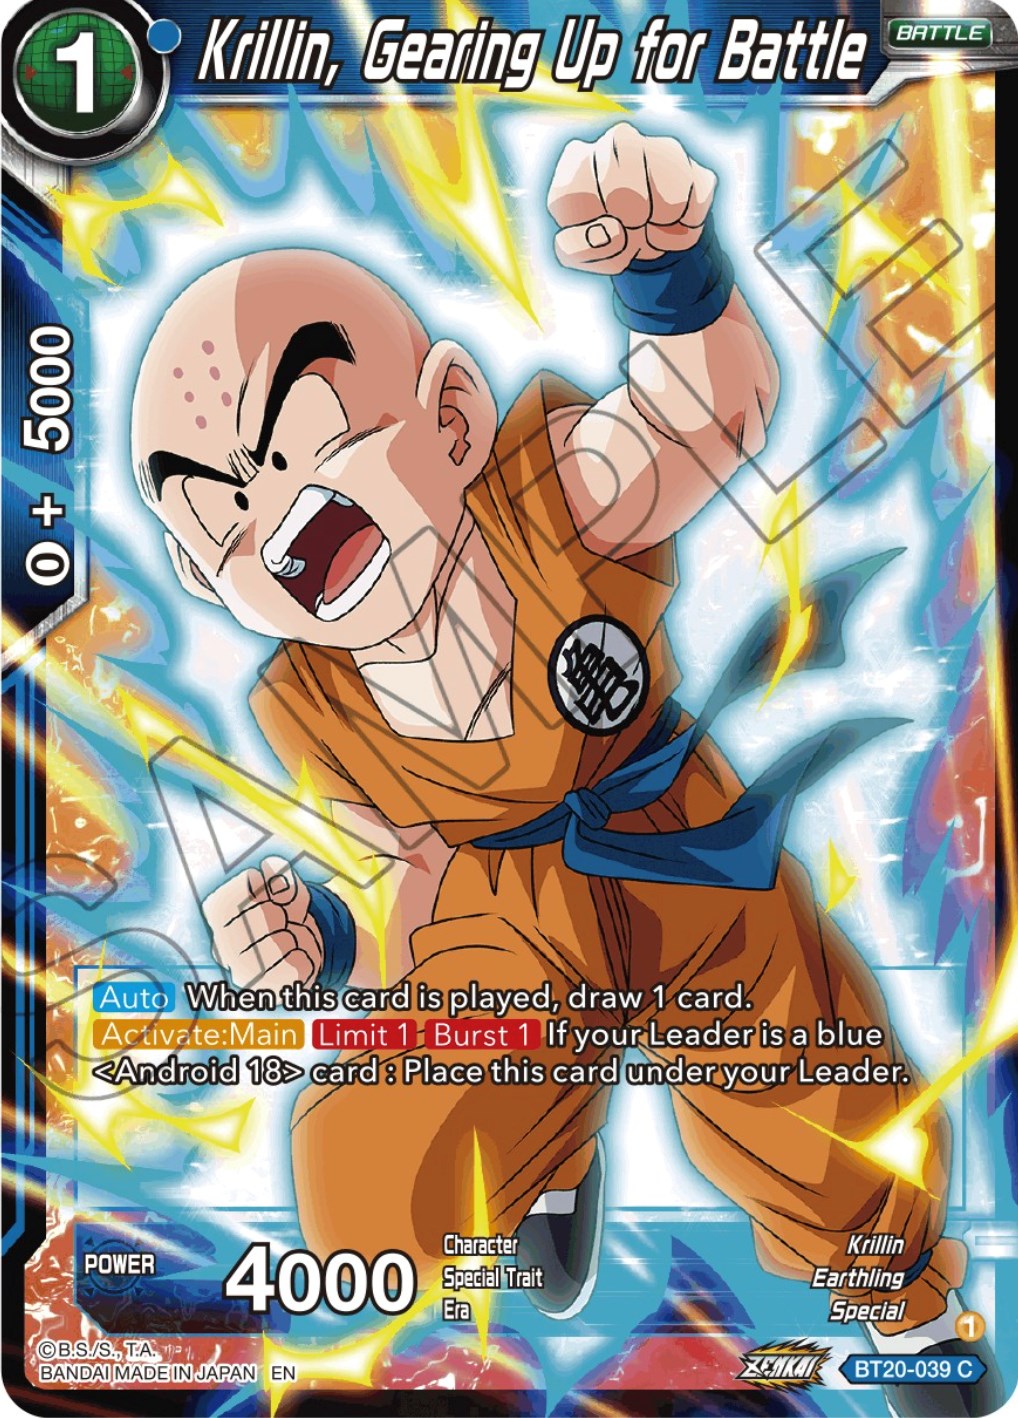 Krillin, Gearing Up for Battle - Power Absorbed - Dragon Ball Super CCG